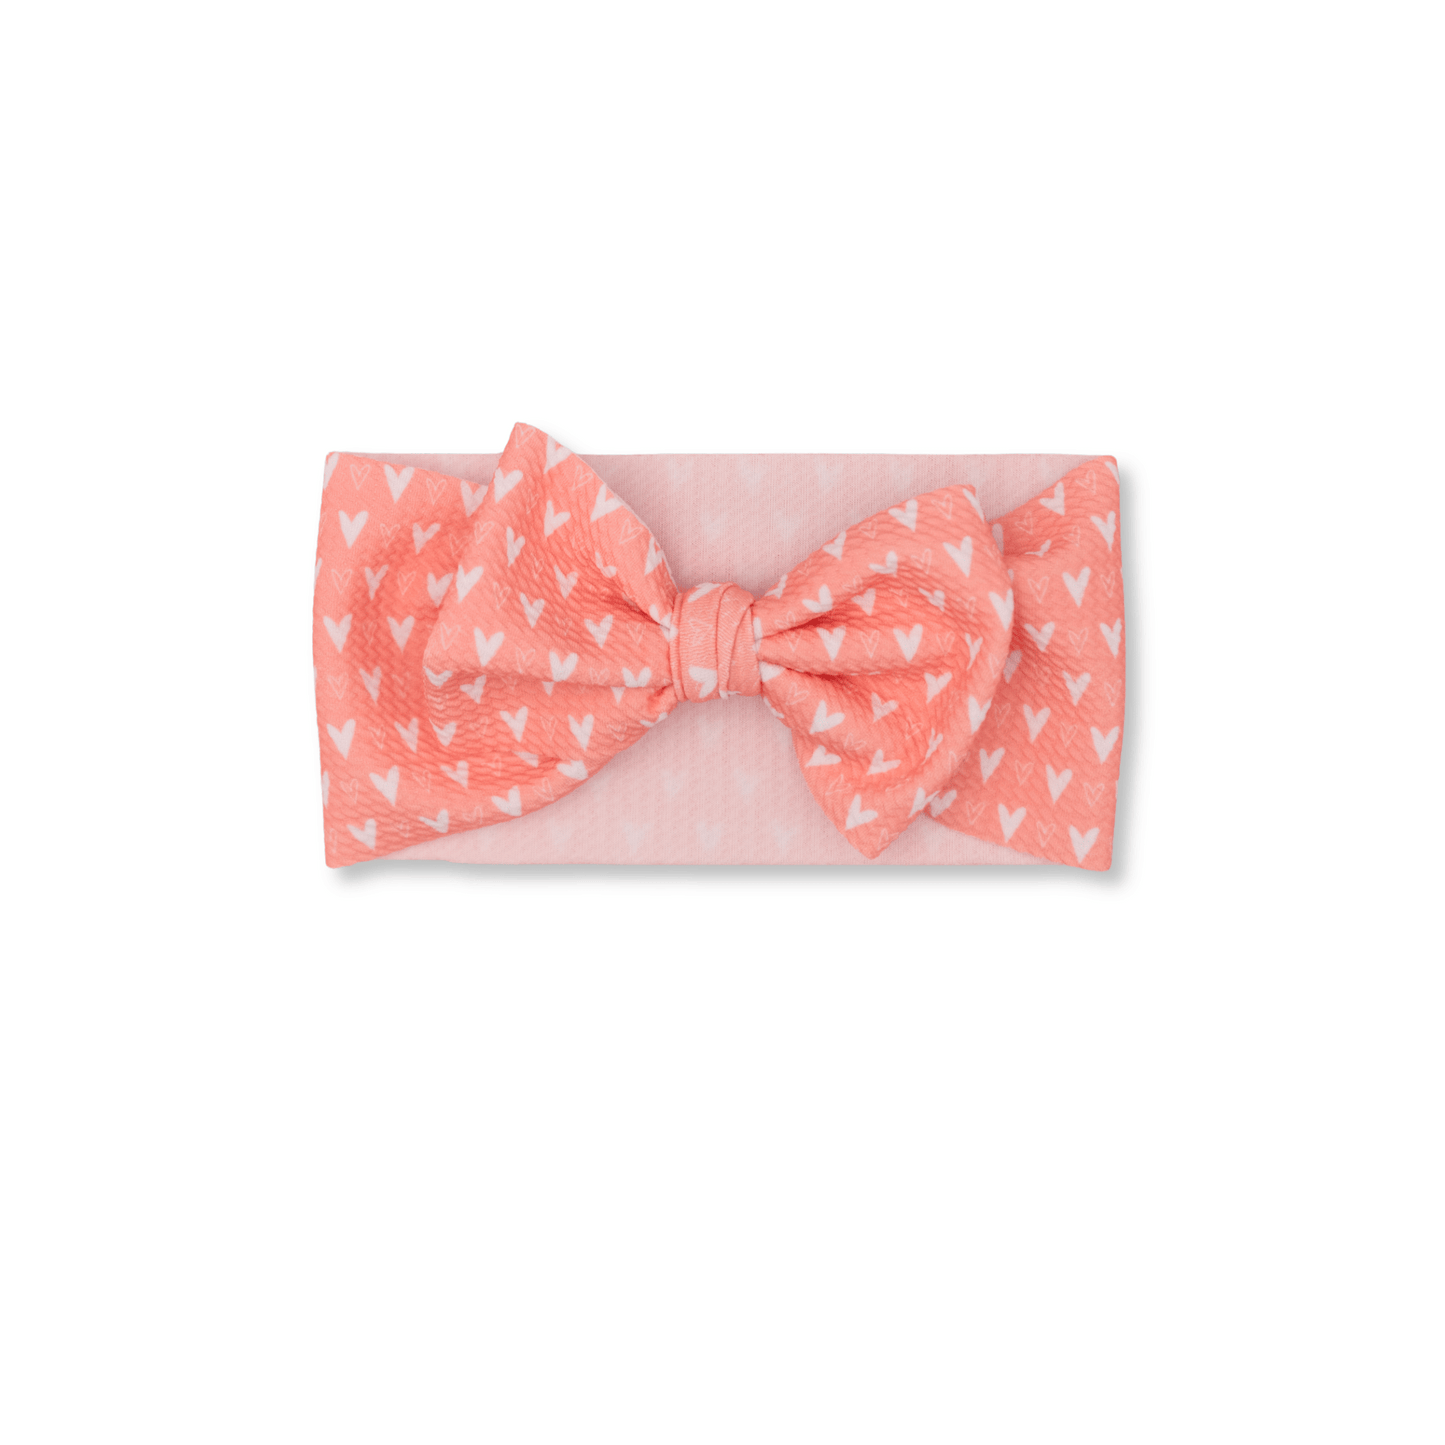 Baby Head Wrap | Handmade Bow | Large Bow | Coral Hearts | FINAL SALE | spsb